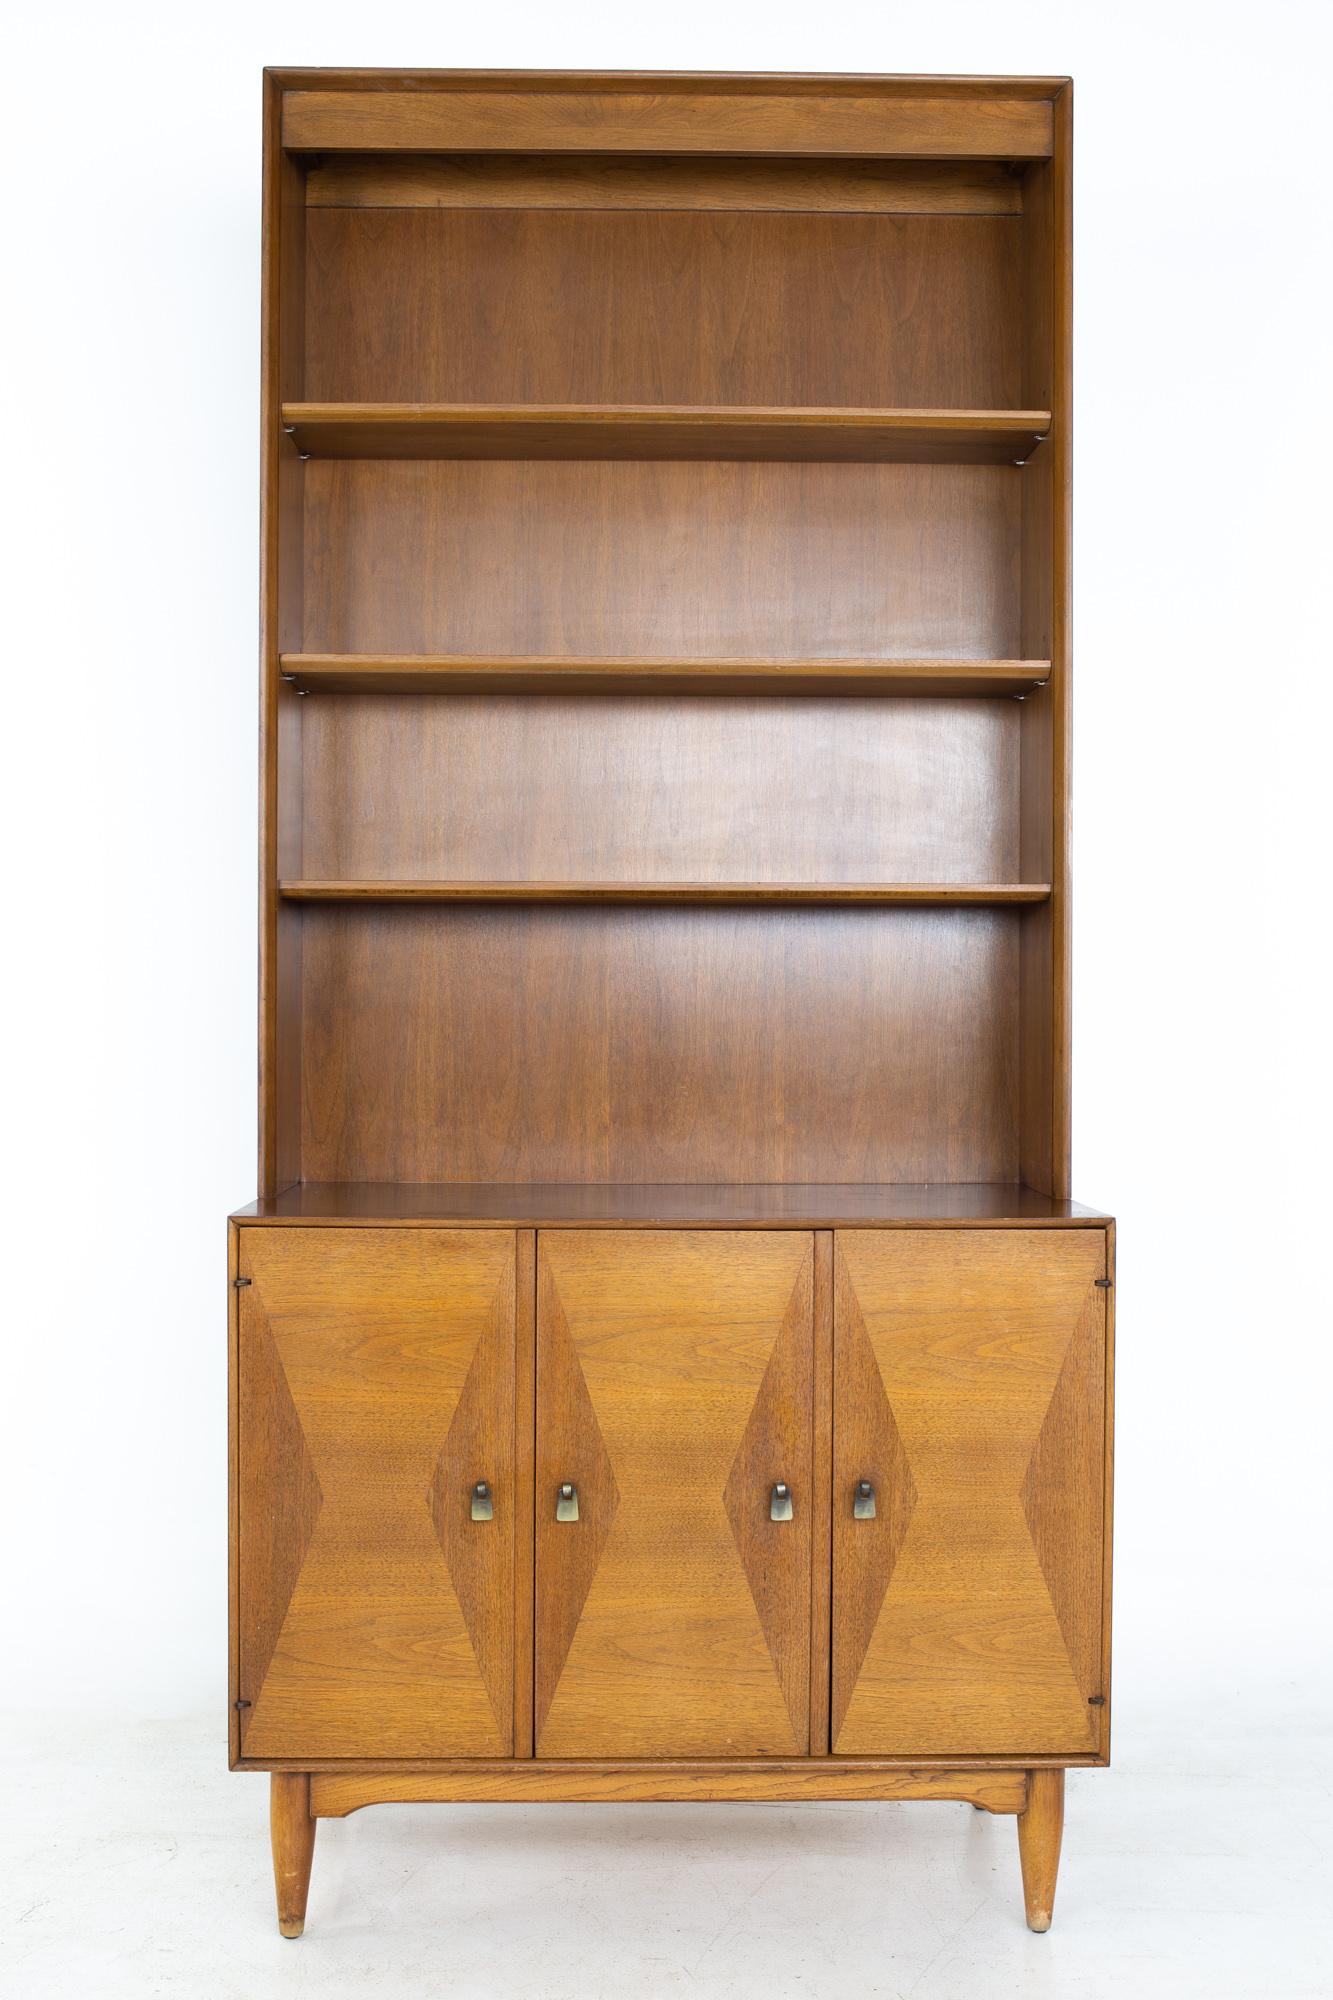 Ramseur Furniture mid century inlaid walnut thin bookcase display sideboard credenza buffet and hutch
Buffet and hutch measure: 36 wide x 19 deep x 80 inches high

All pieces of furniture can be had in what we call restored vintage condition.